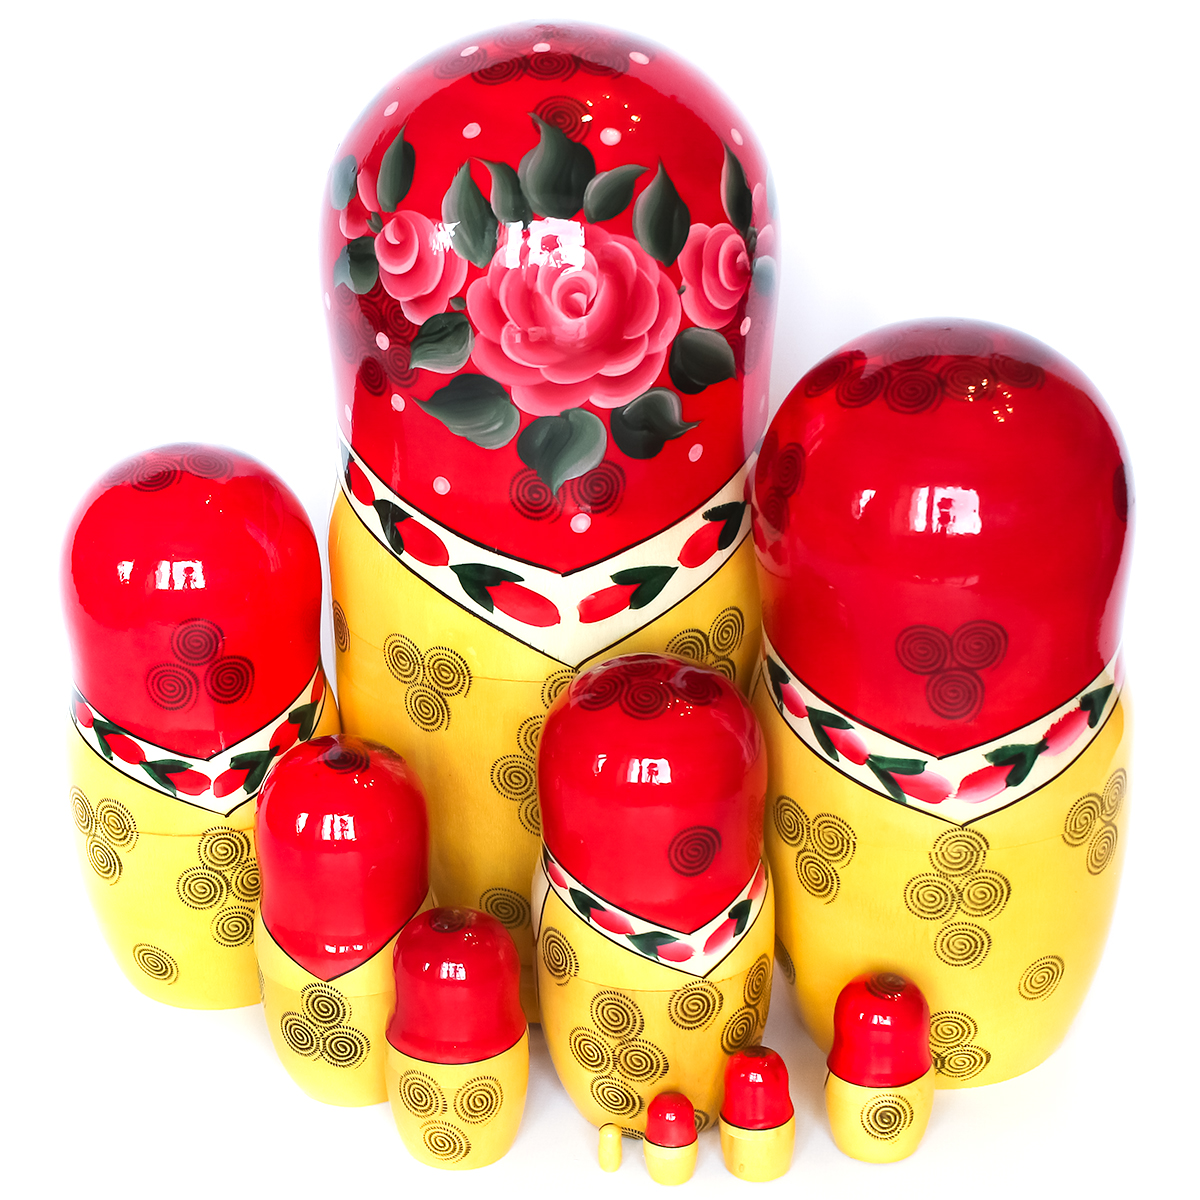 Red Wooden Matryoshka Doll (10 pcs), Hand-painted, 10.5 inches, 1.6 pounds